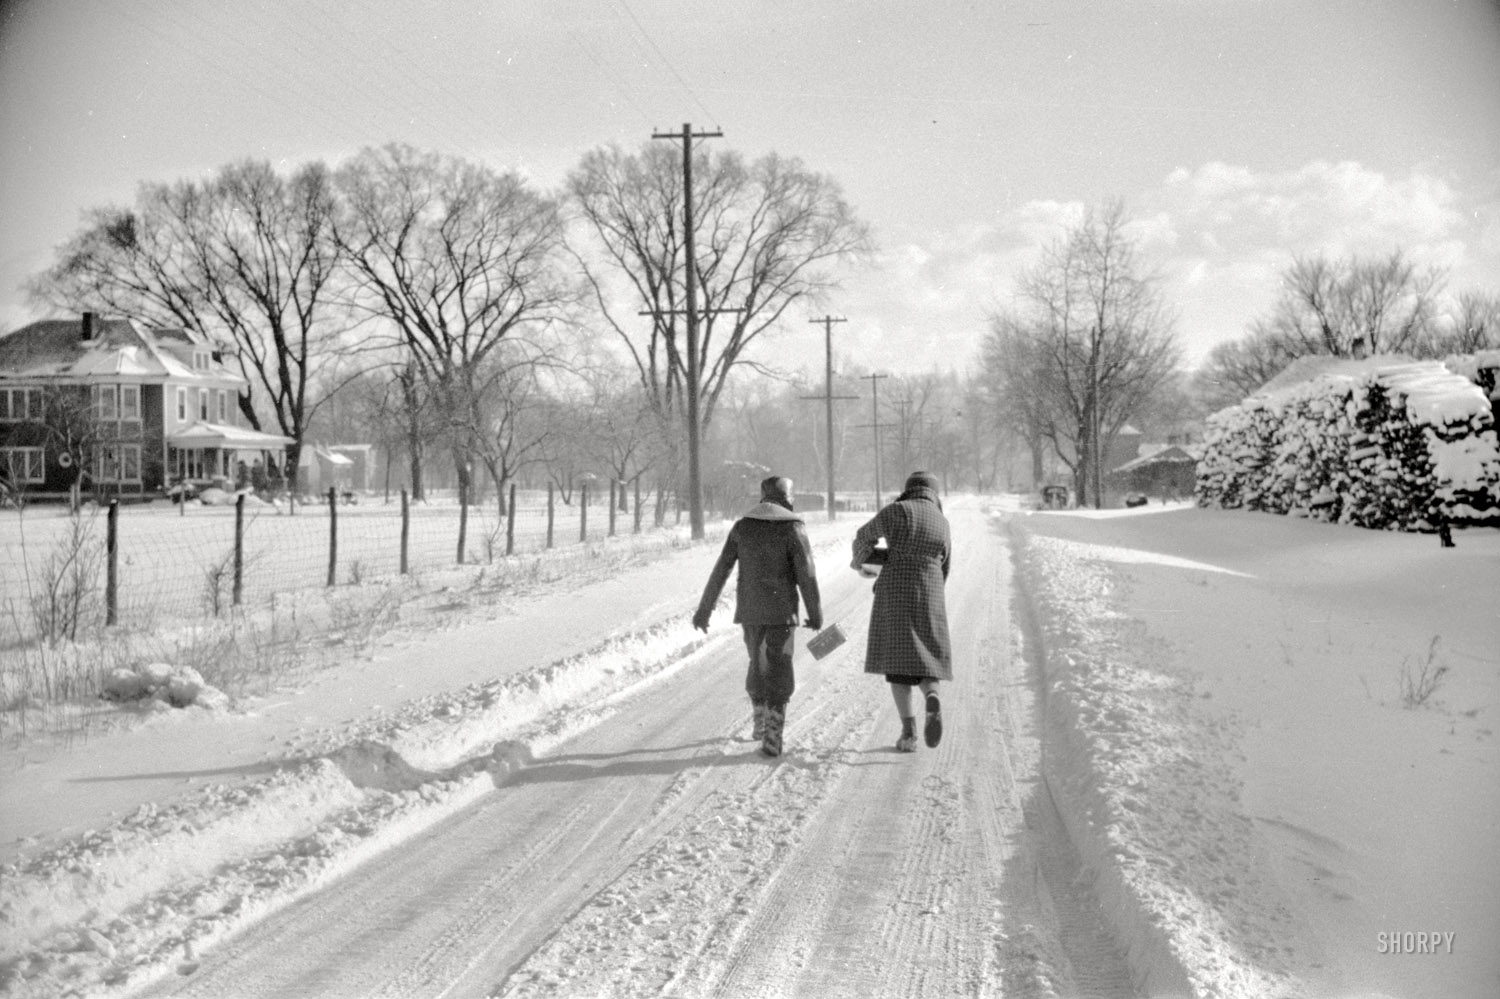 February 1940. Chillicothe, Ohio. "Children going home from school." 35mm negative by John Vachon for the Farm Security Administration. View full size.